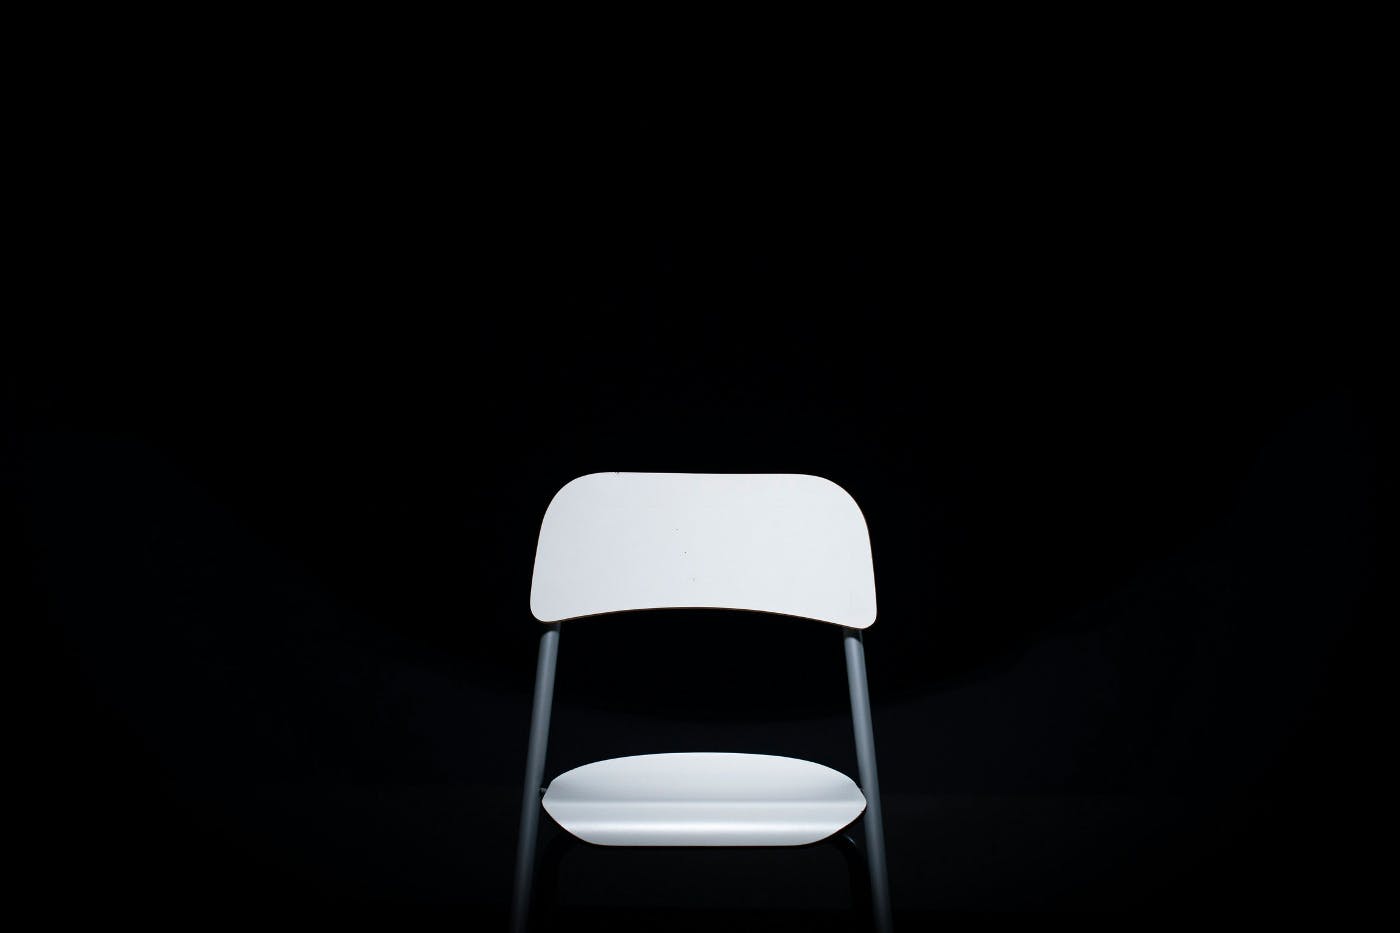 An empty white chair in a black background